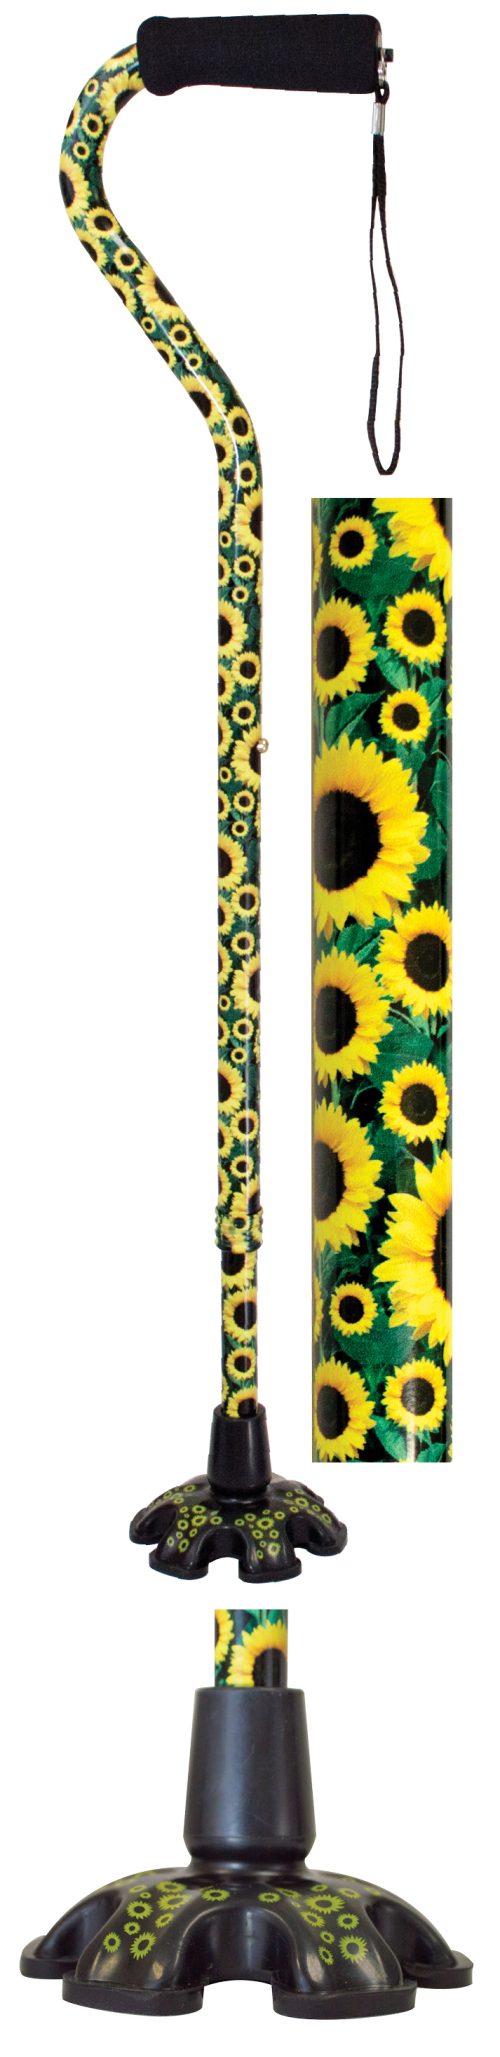 COUTURE OFFSET CANES WITH MATCHING STANDING TIPS IN SUNFLOWER